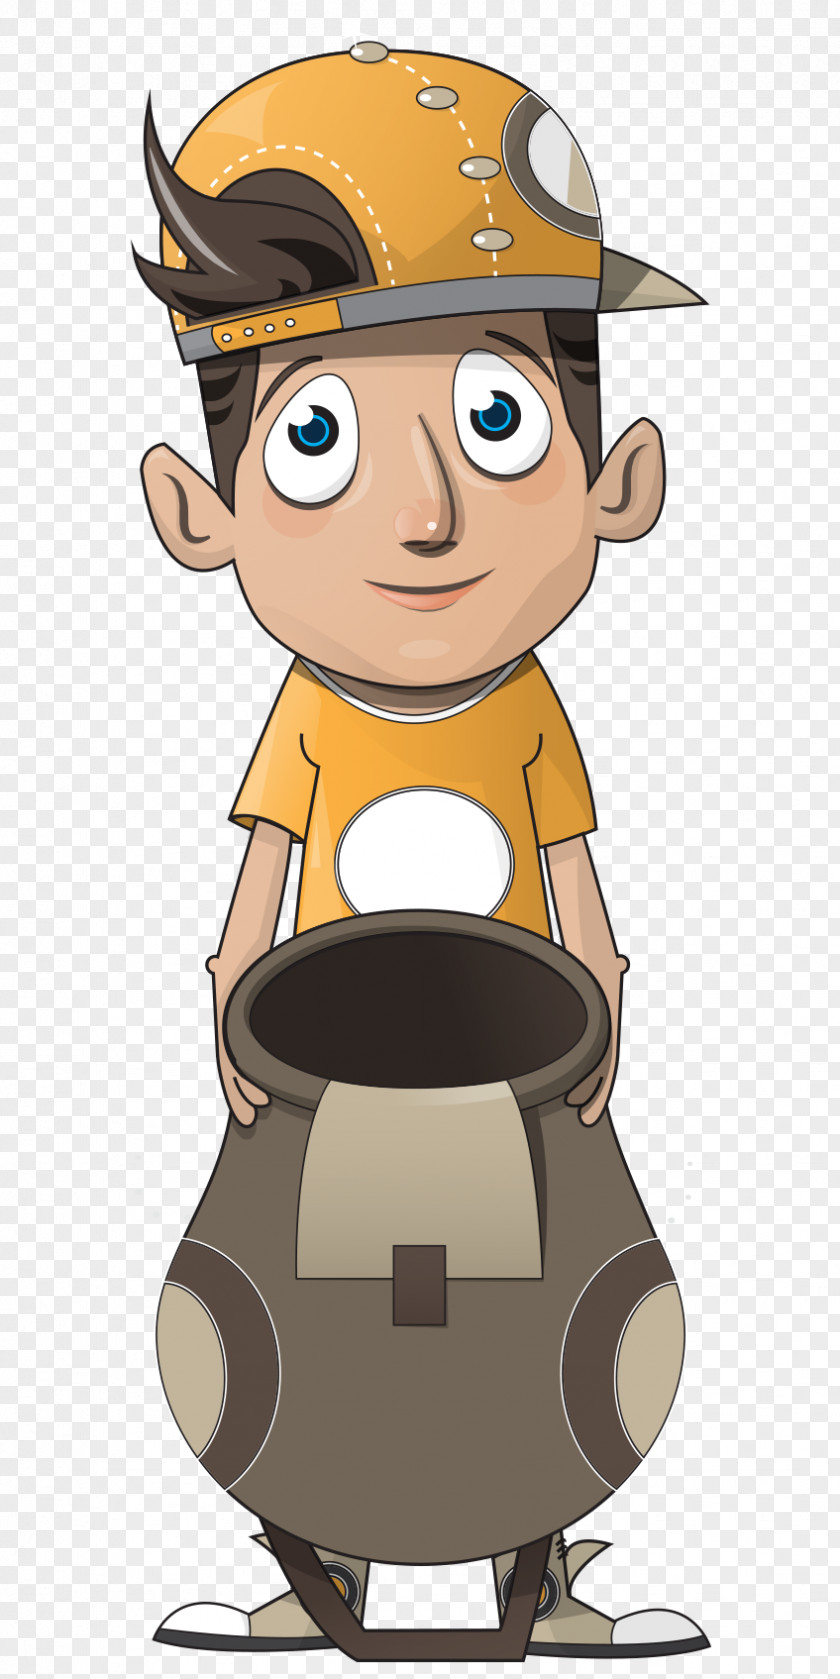 Hand-painted Cartoon Leisure Hat Boy Graphic Design PNG